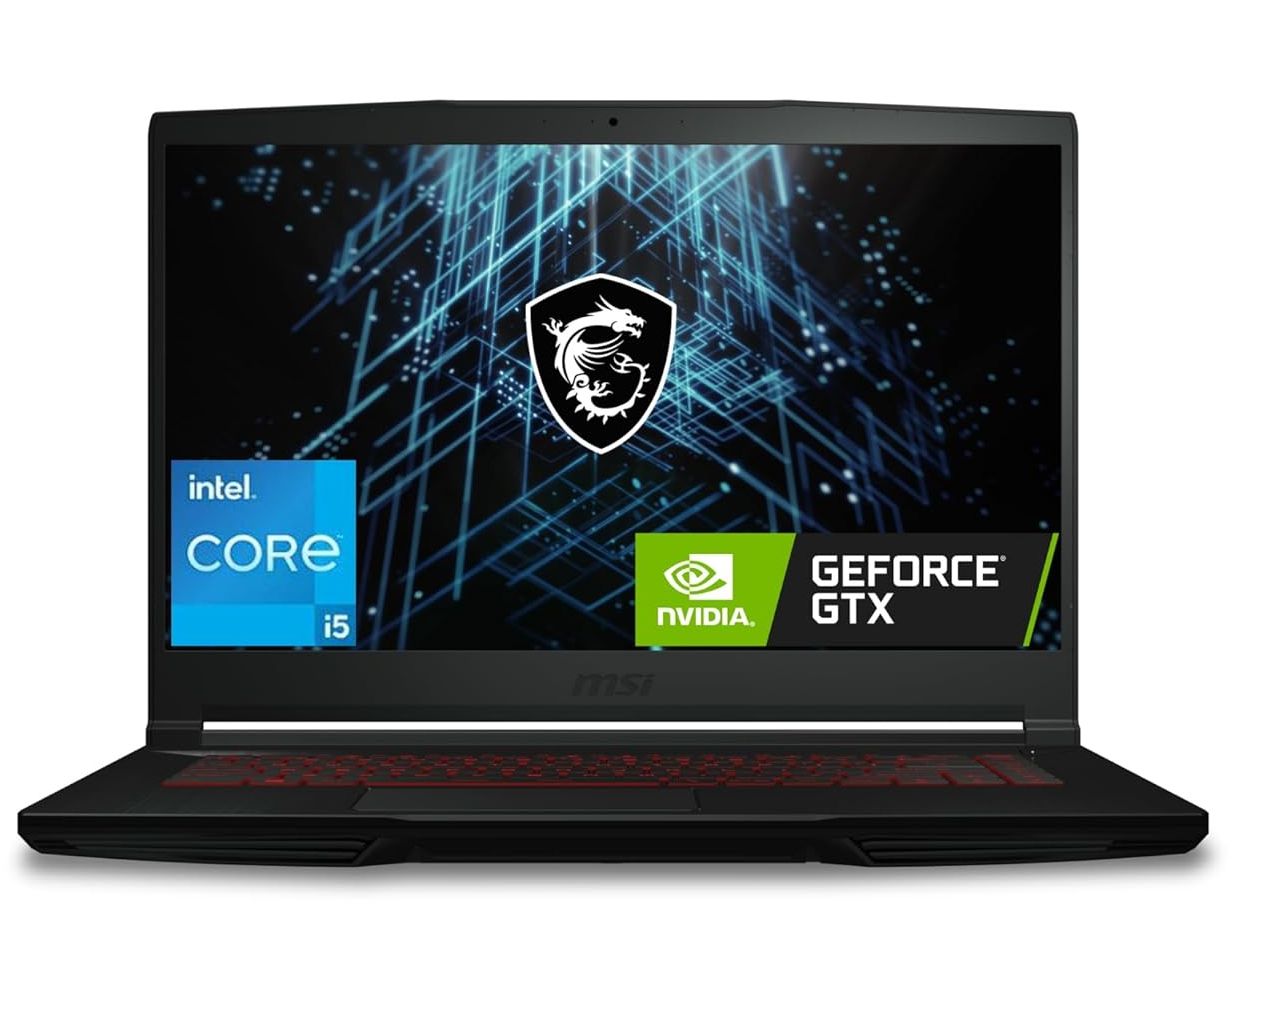 MSI GF63 Thin Gaming Laptop Loot Under INR 40000 with Nvidia GeForce GTX Graphics Card